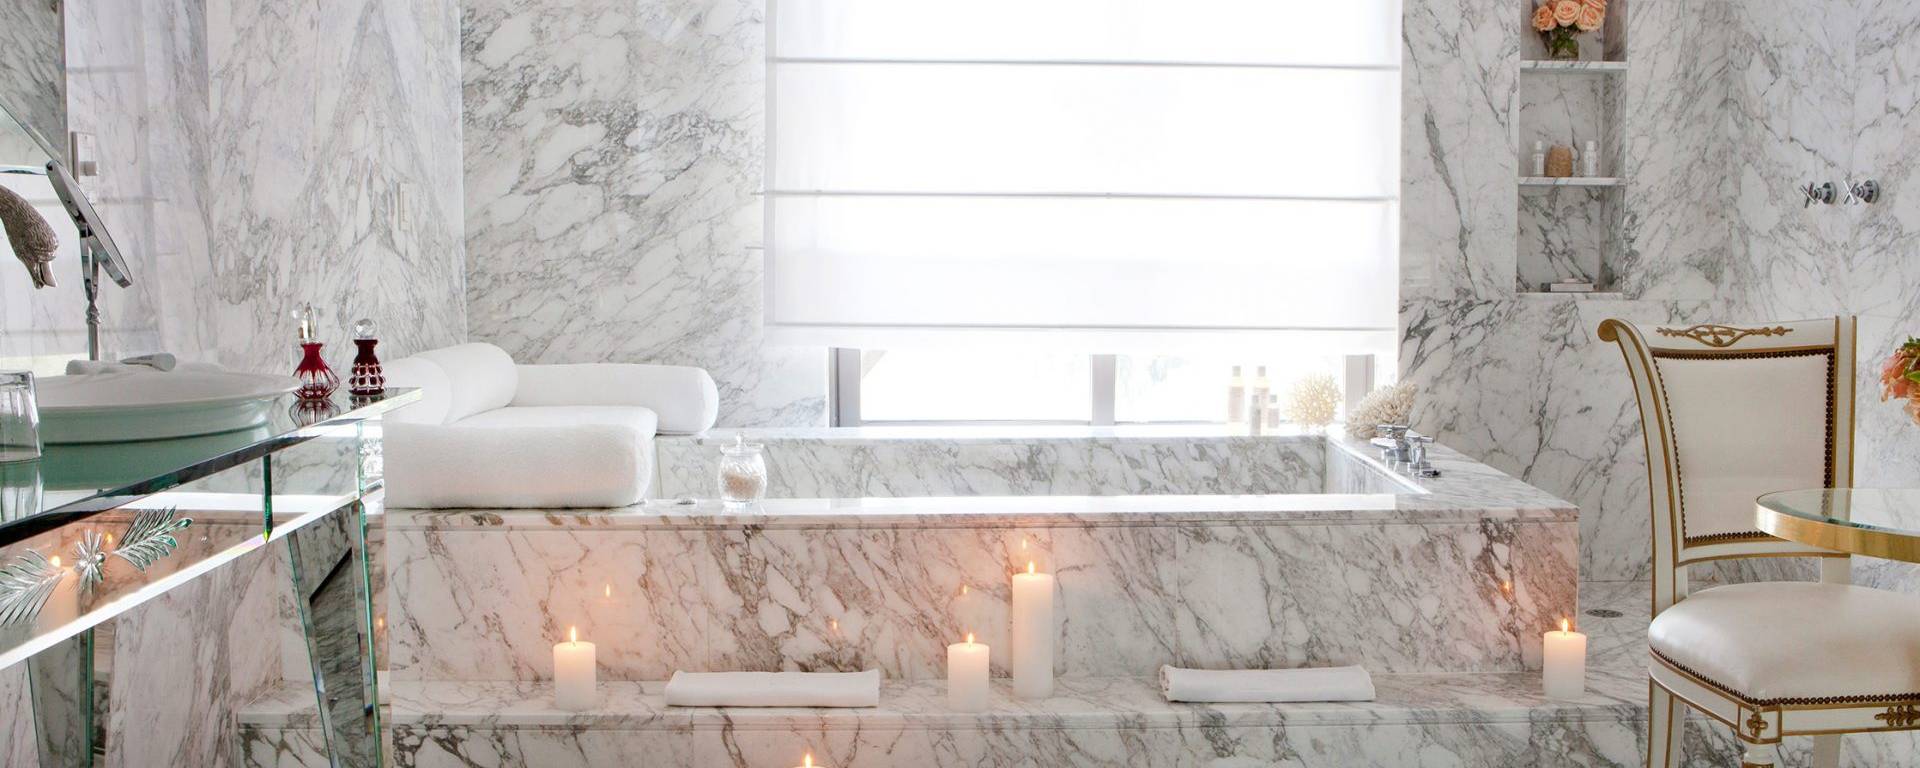 bathtub in hotel room lit by candles